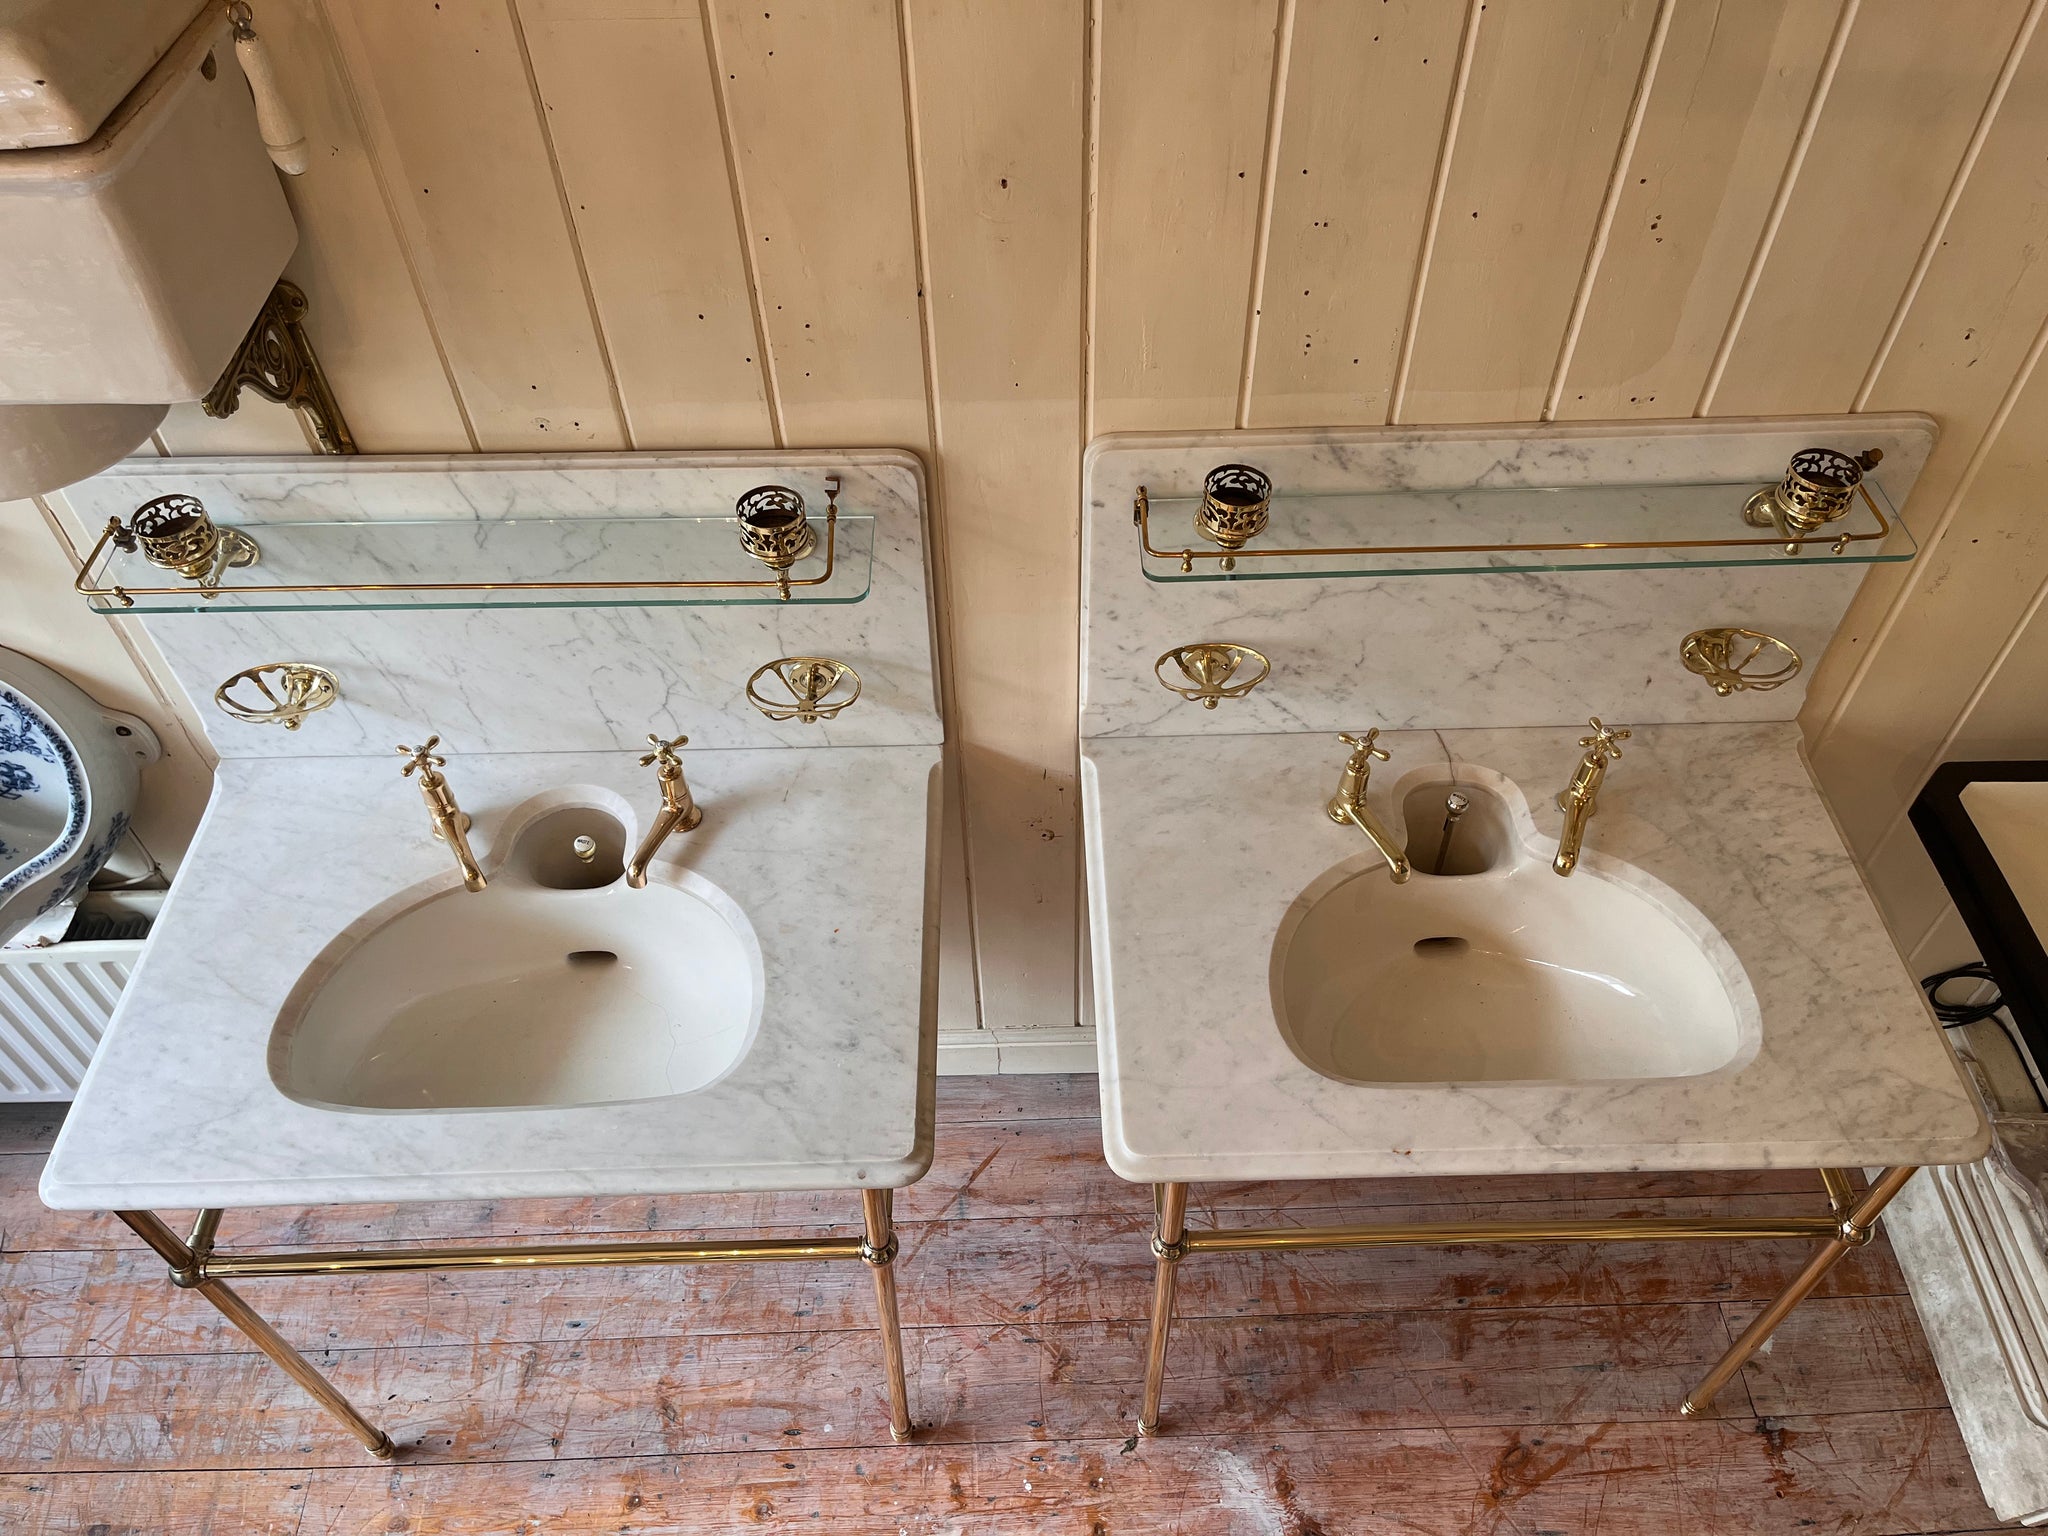 Pair of Antique Marble Basins on Brass Stands by Shanks & Co LTD C.1930